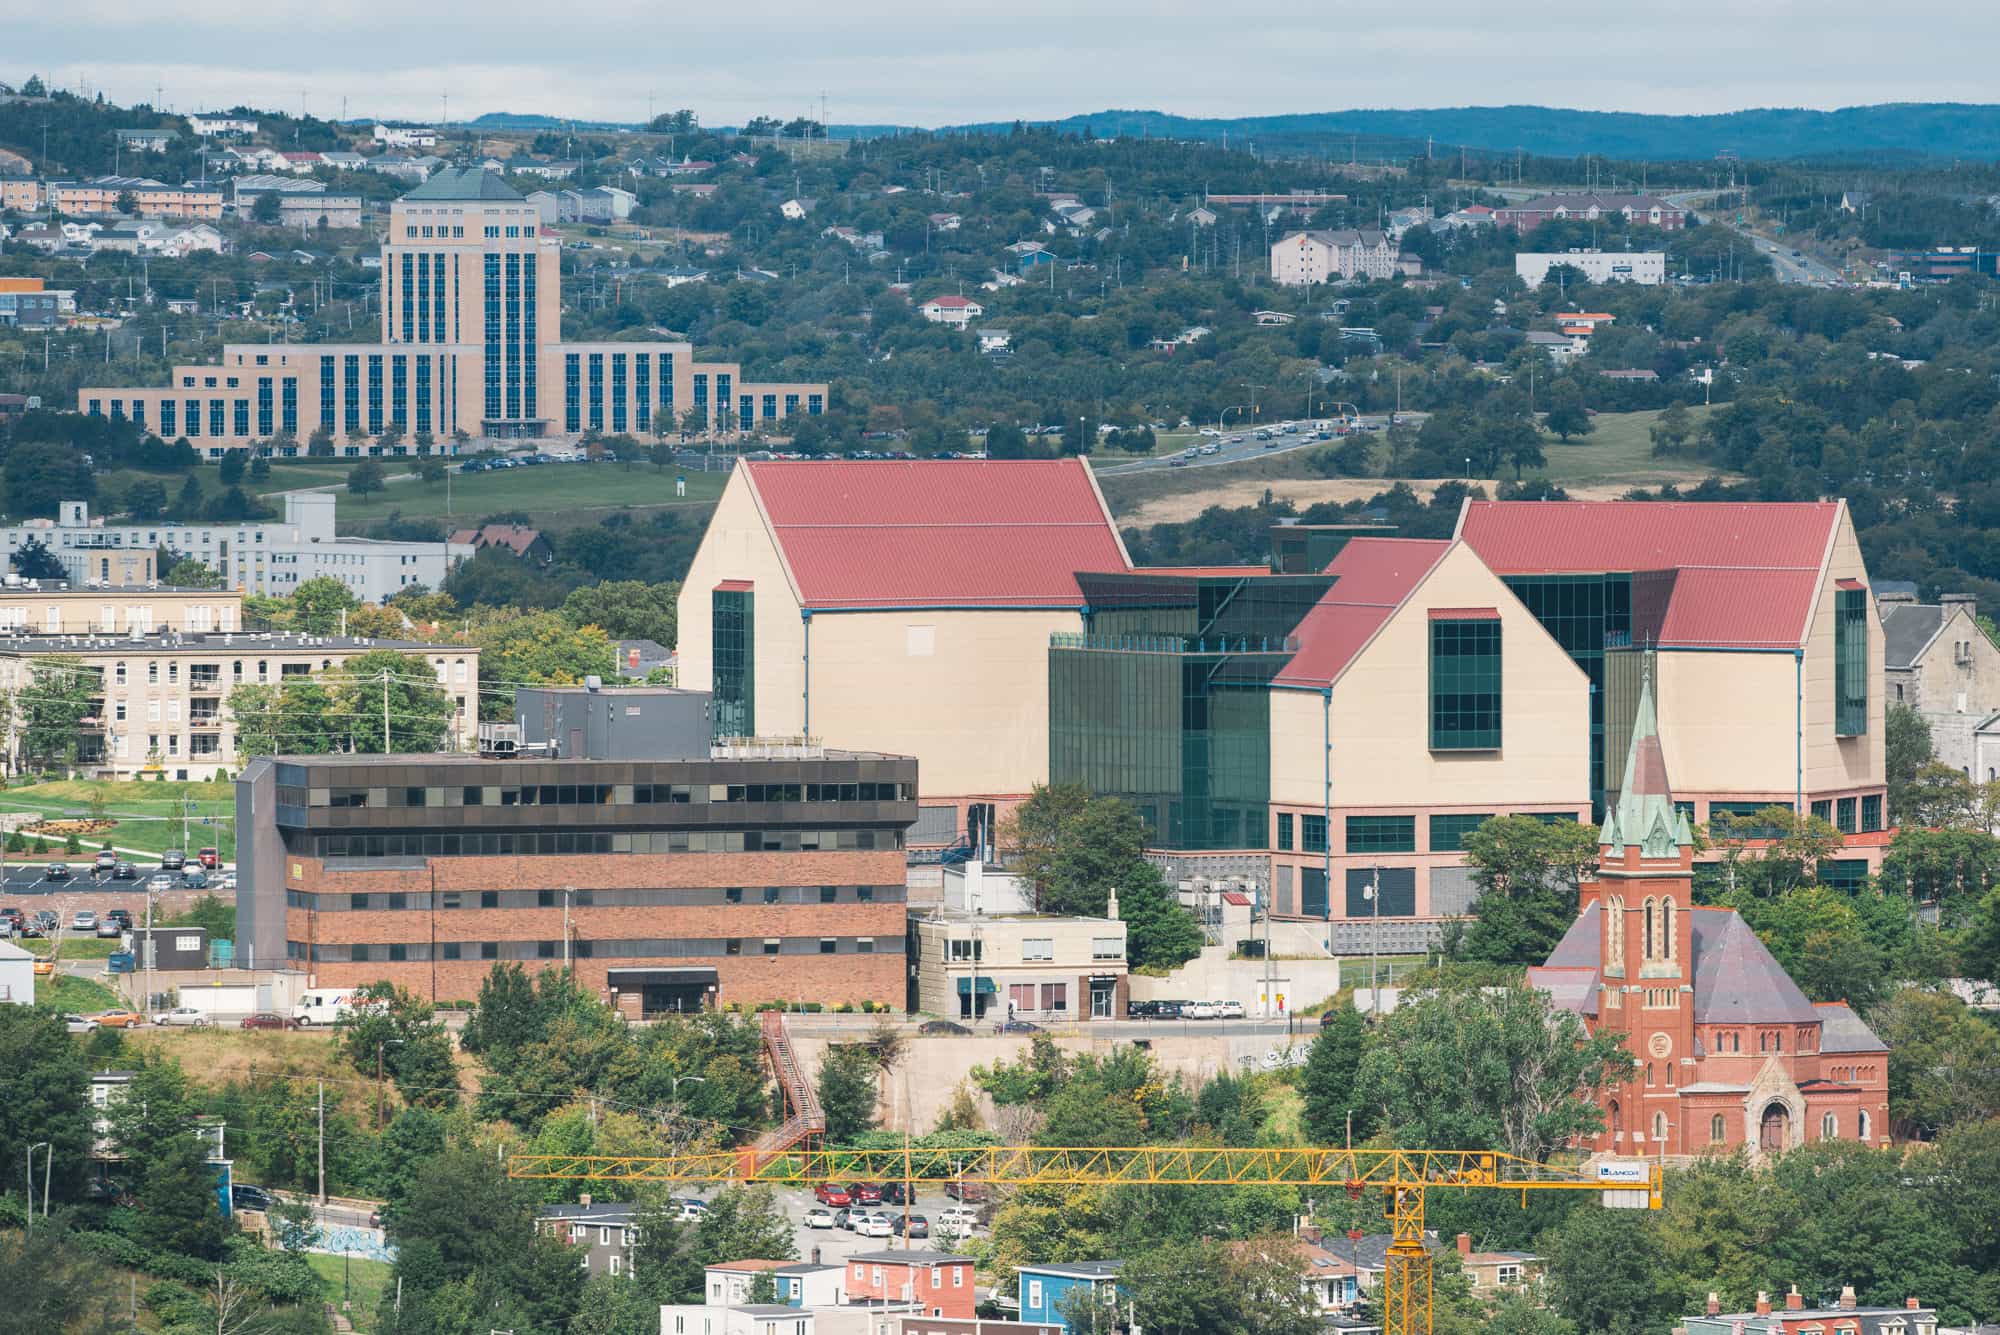 The Rooms and Newfoundland's Confederation Building are pictured here in a telephoto landscape photograph.